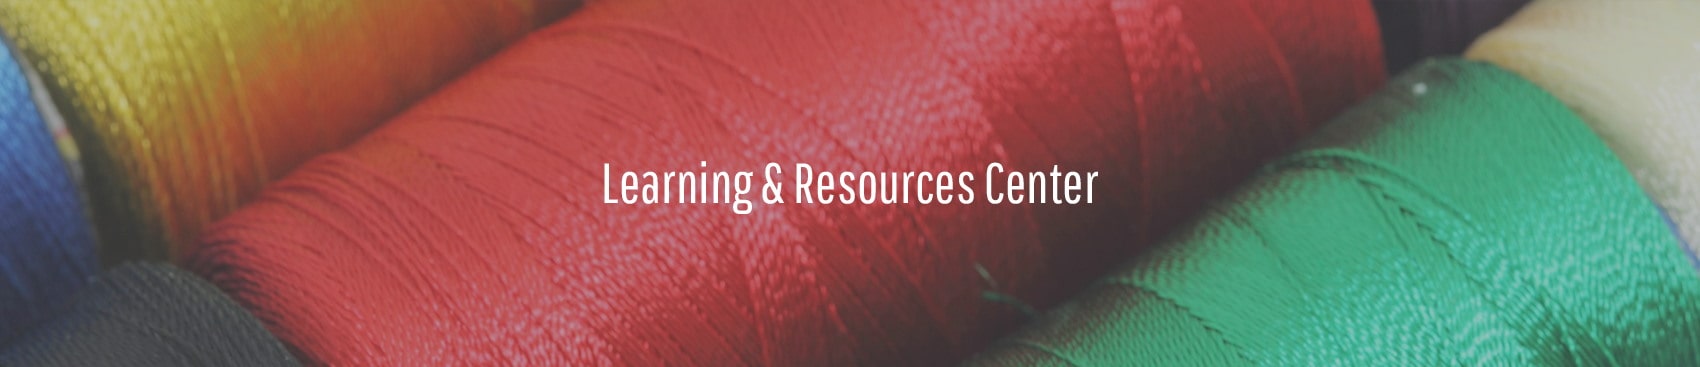 Learning Center and Resources